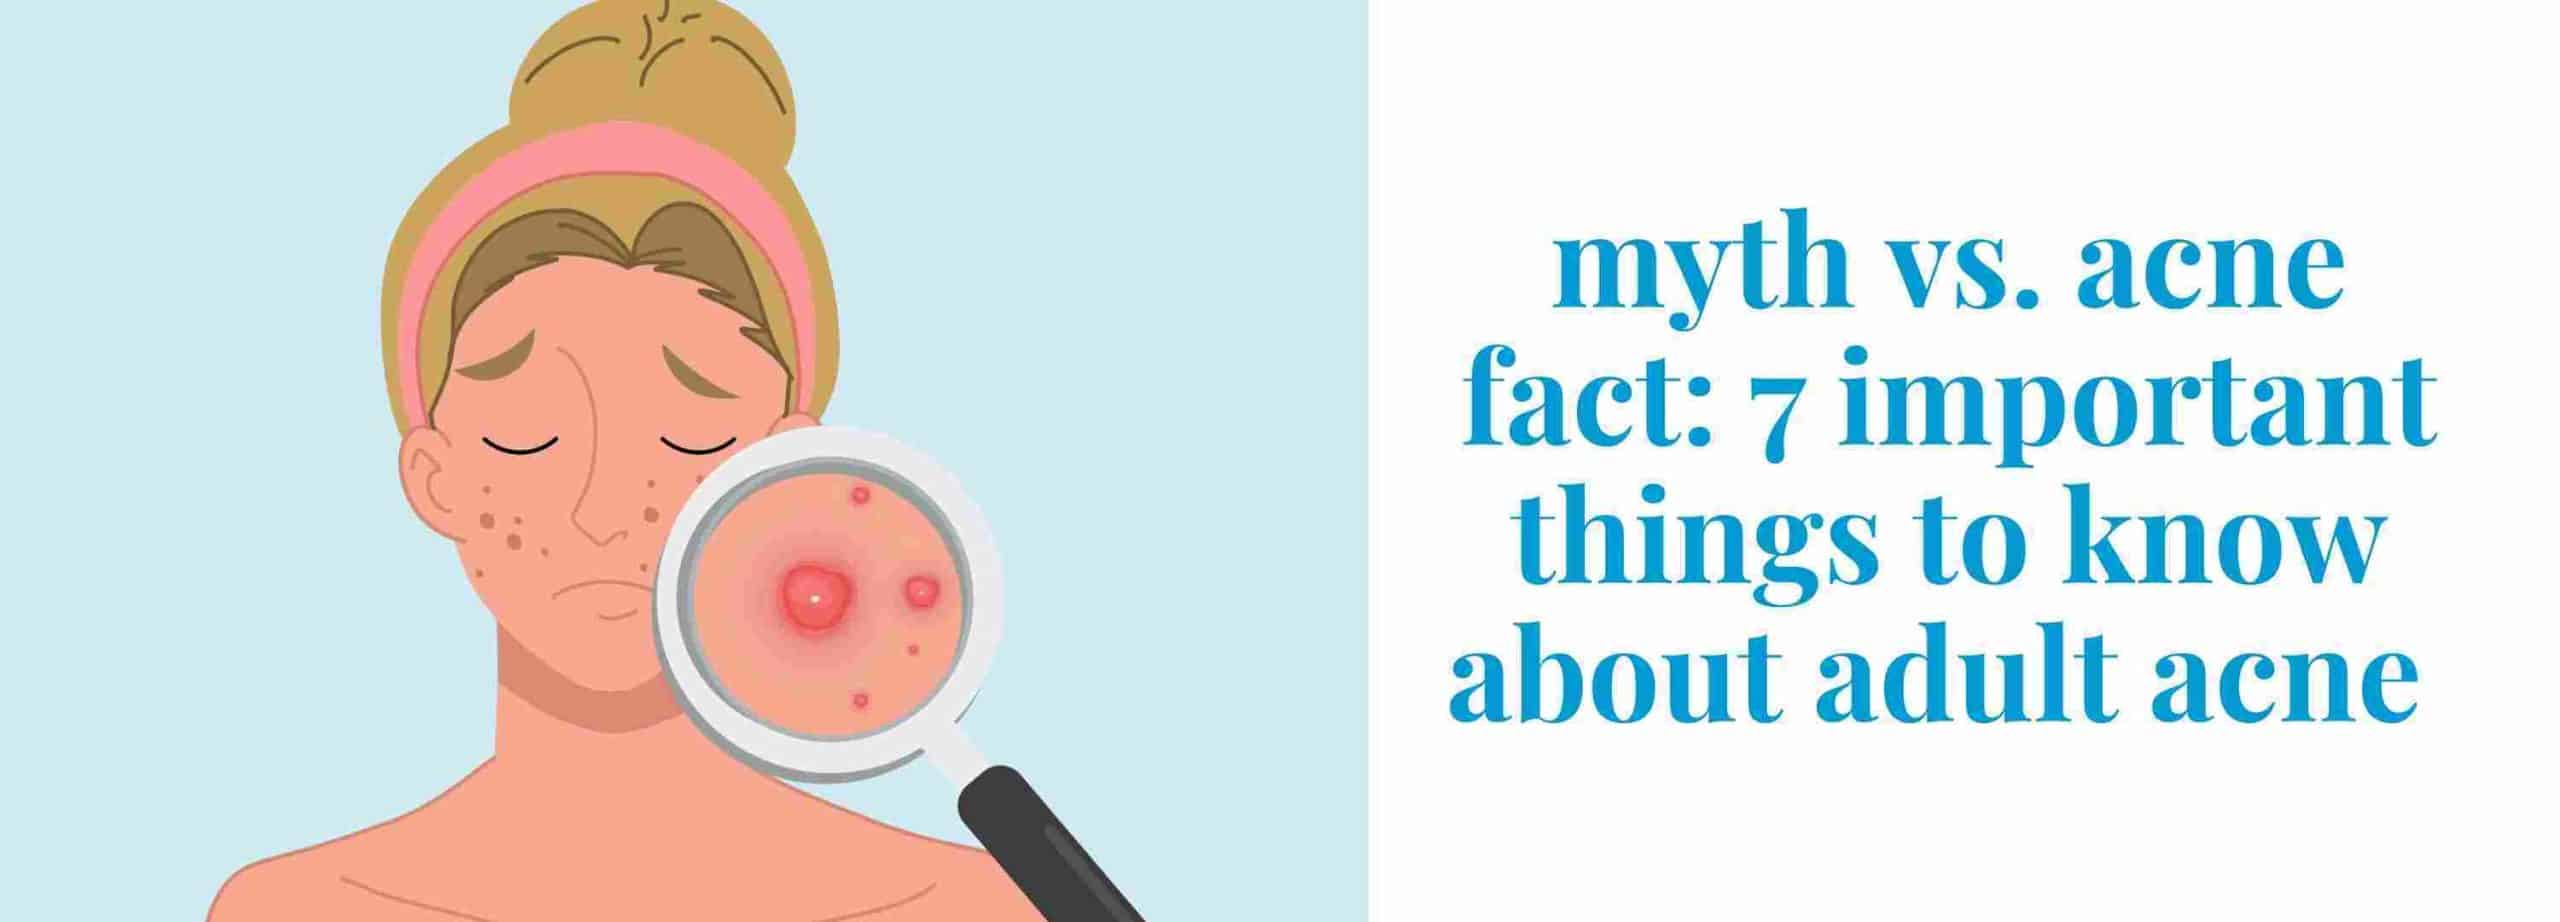 myth vs acne facts: 7 important things to know about adult acne